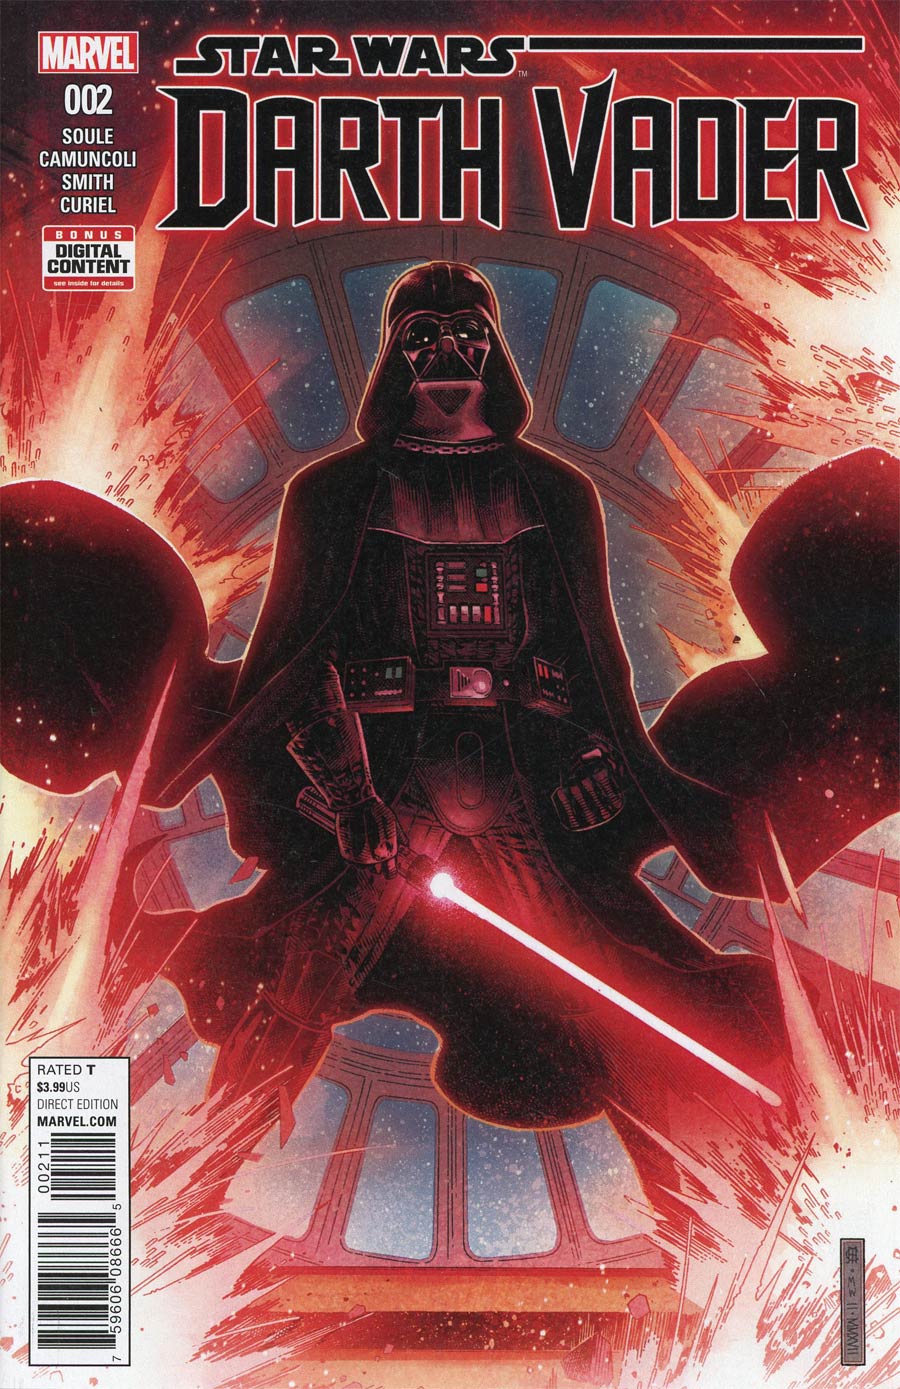 Darth Vader Vol 2 #2 Cover A 1st Ptg Regular Jim Cheung Cover